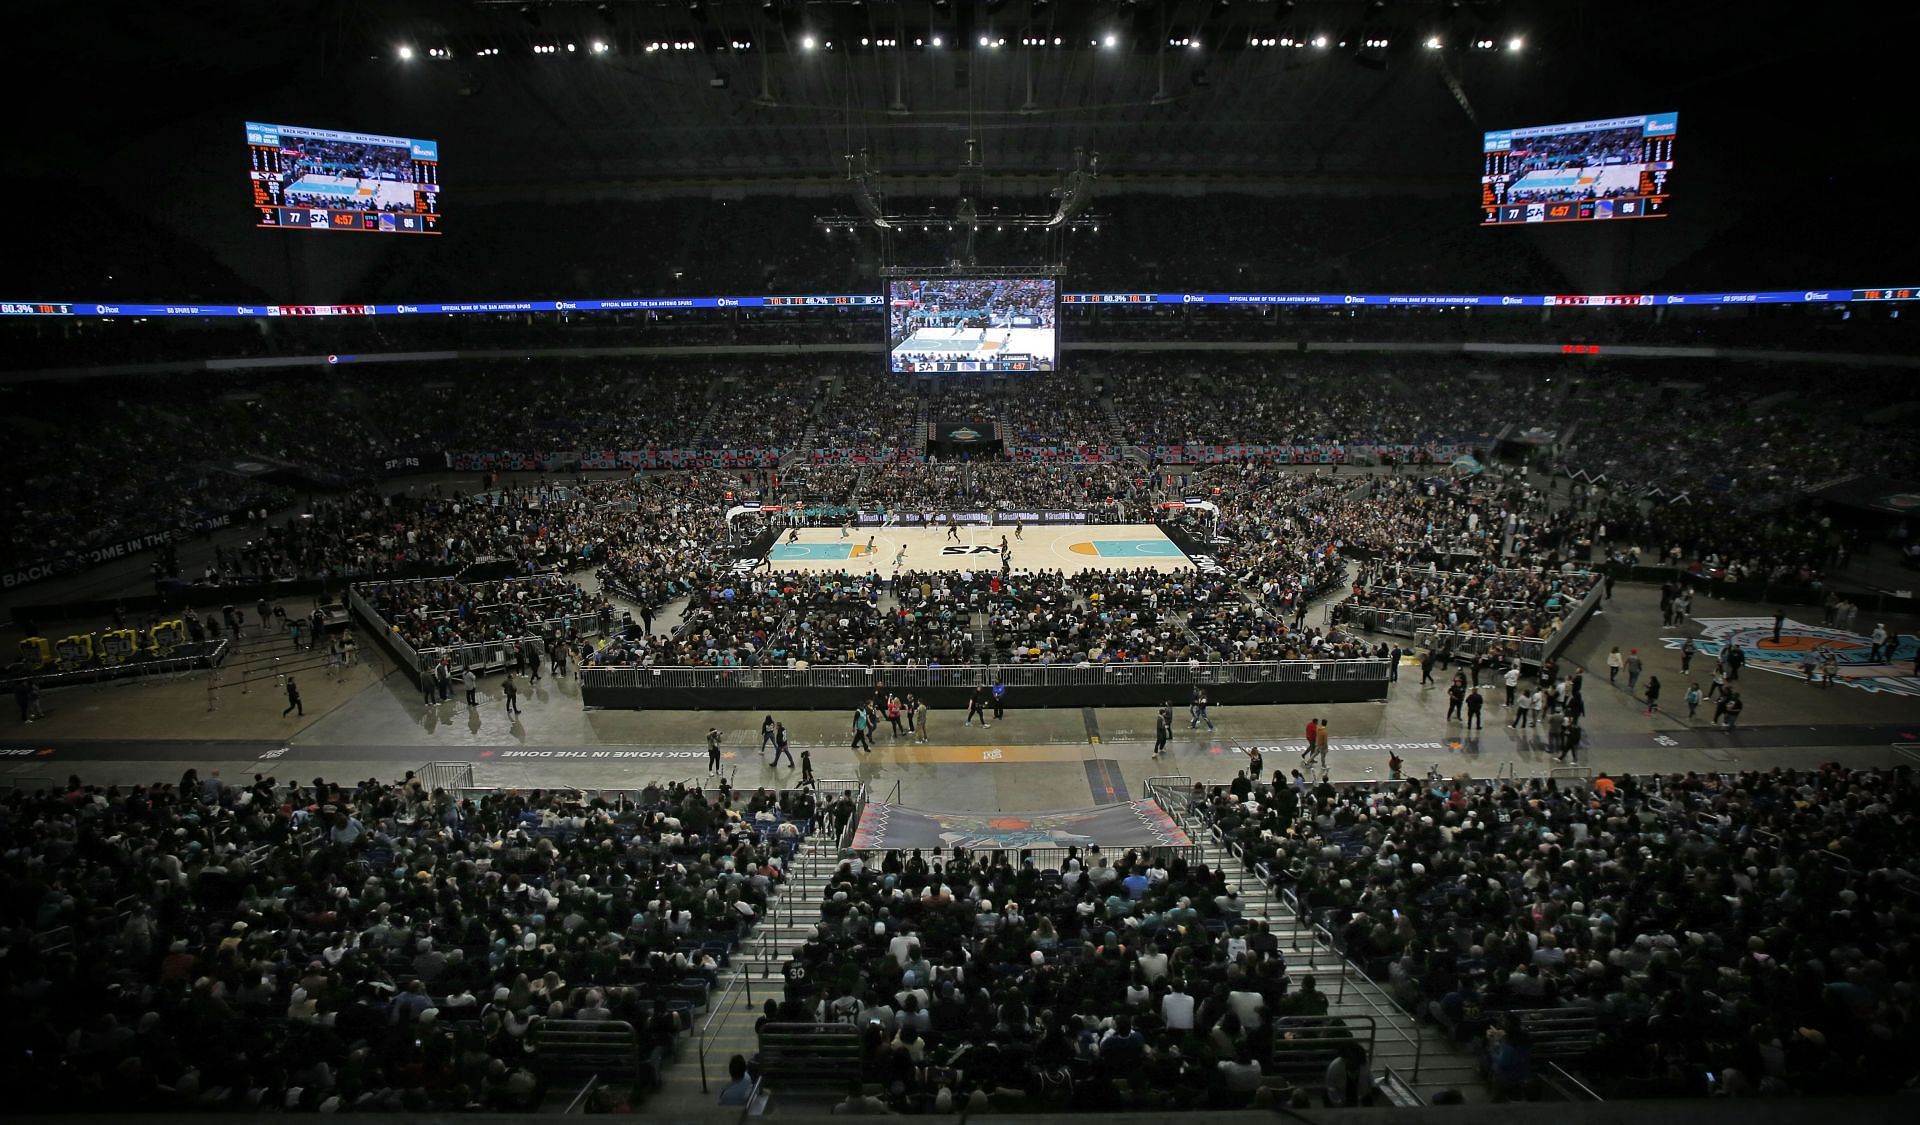 68,323 in attendance for the Warriors-Spurs regular season game at the Alamodome.